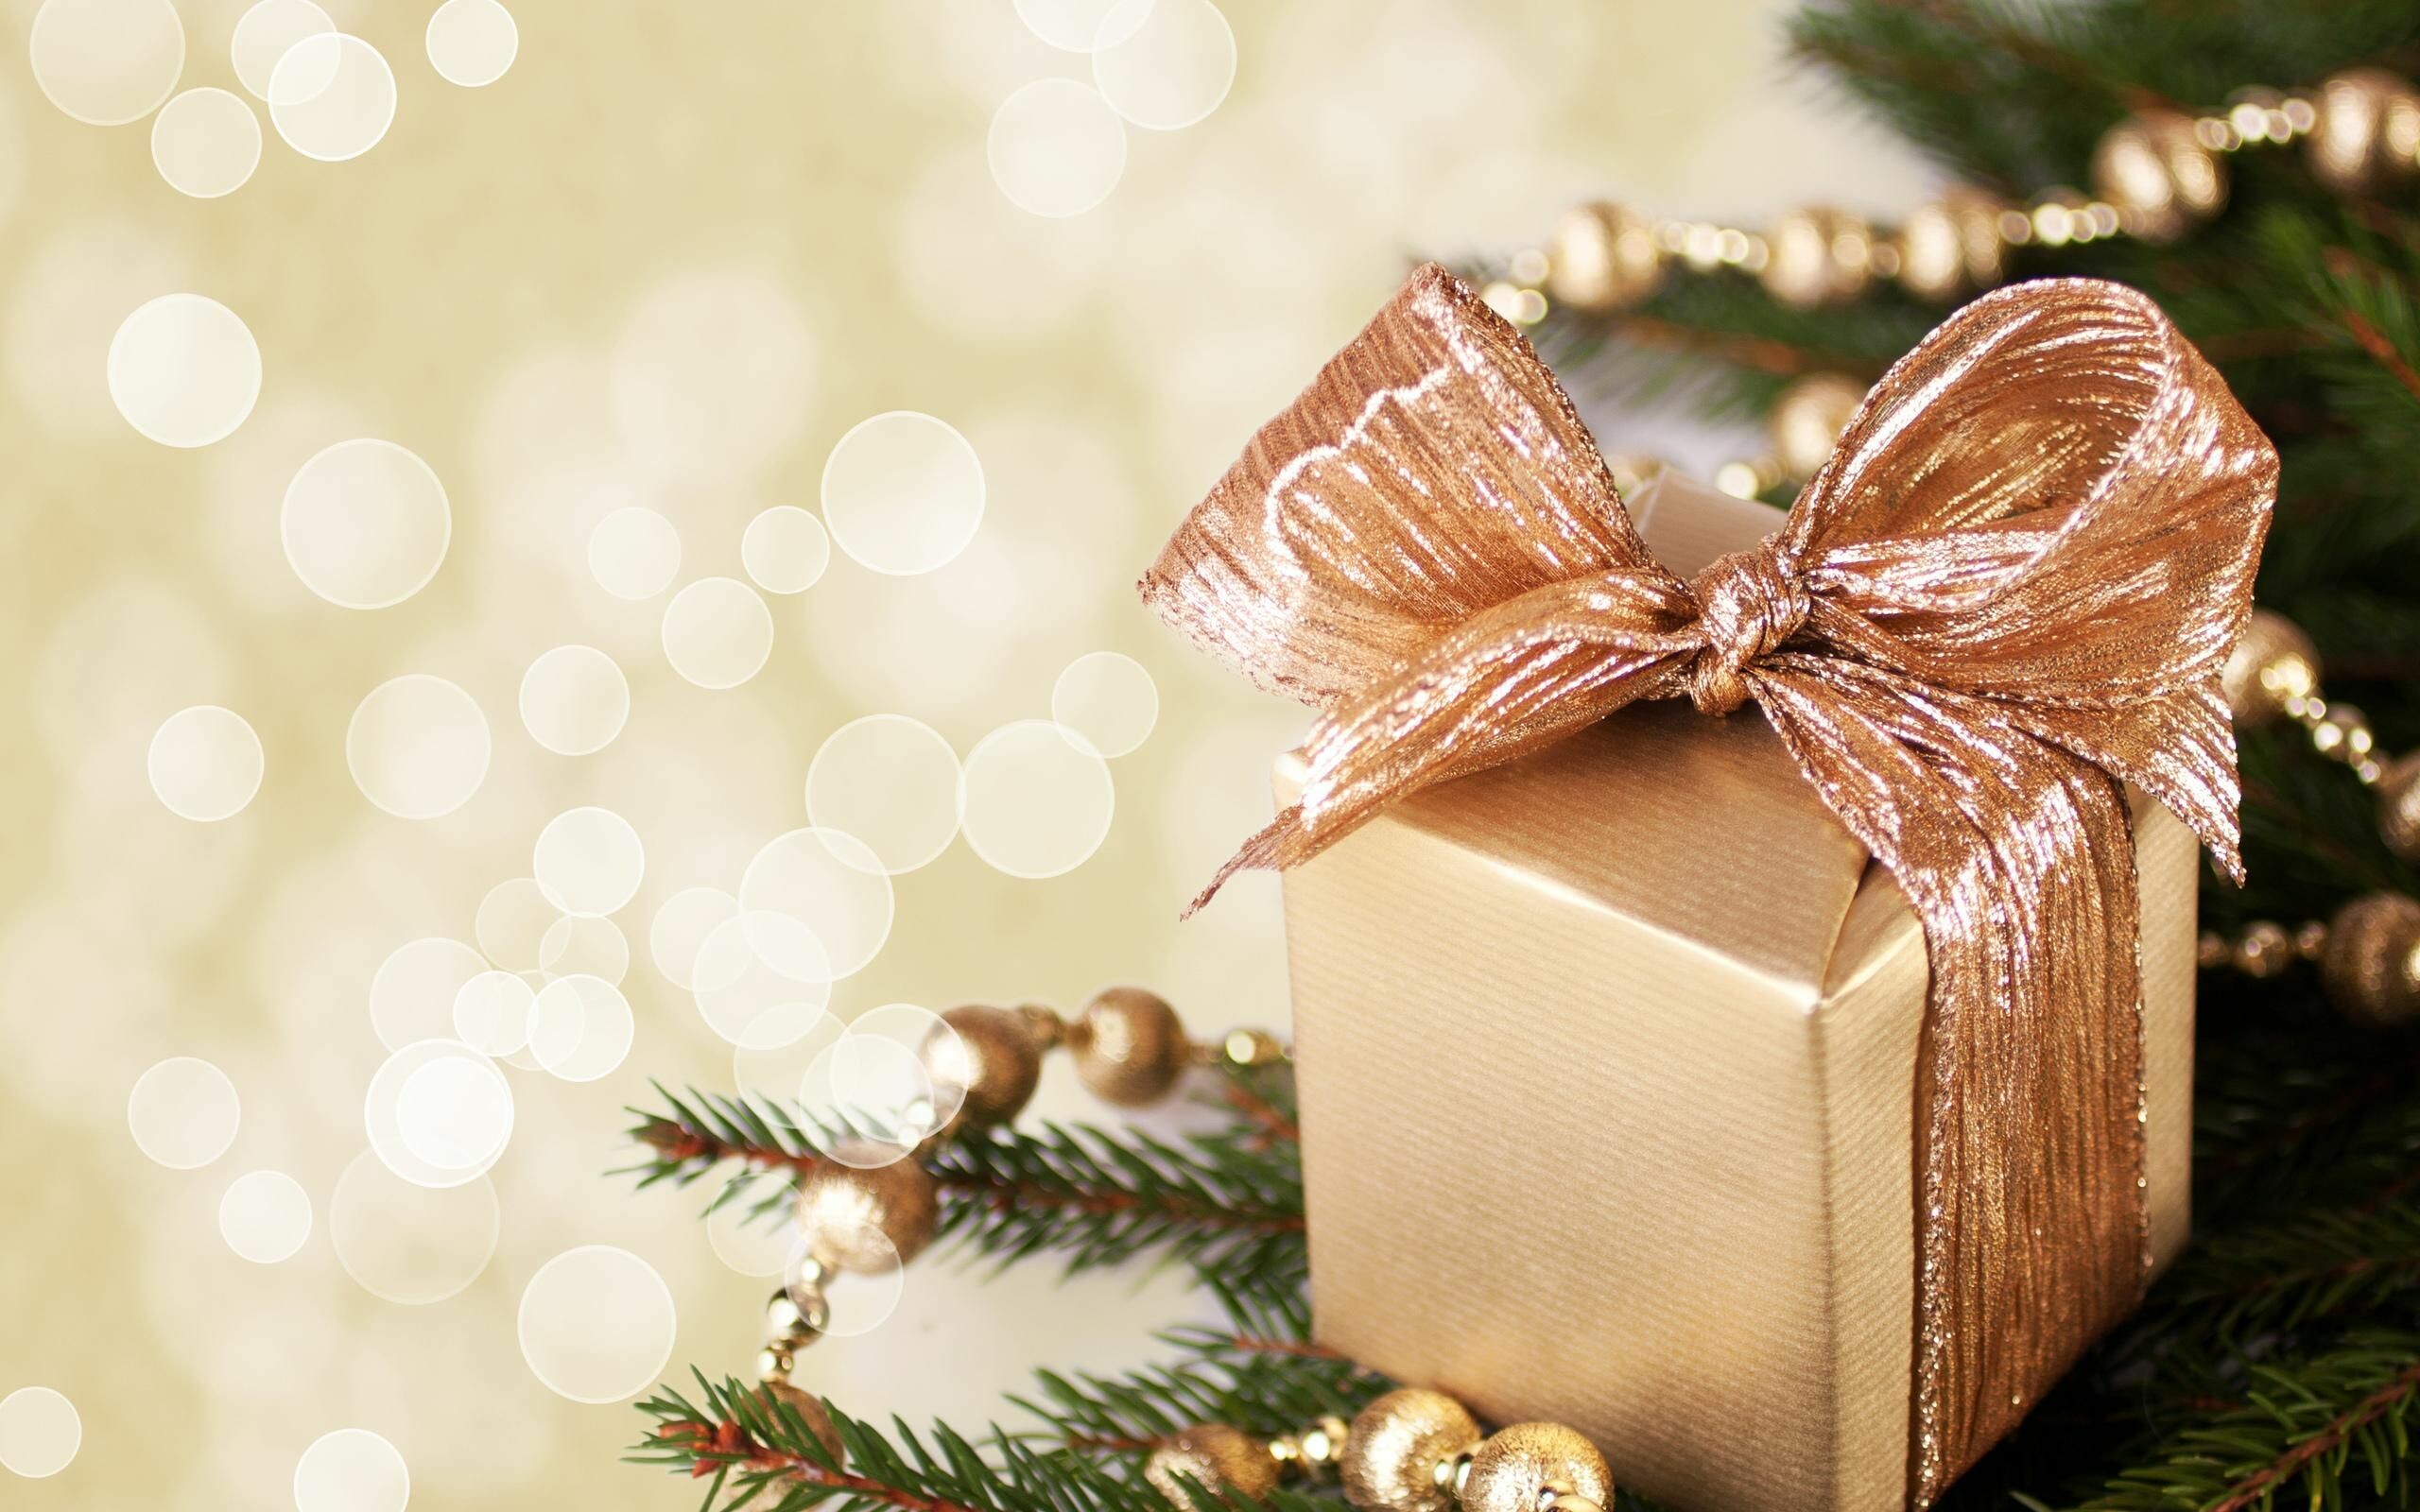 Christmas Gifts: Decorations, A present given at winter holiday, Wrapping. 2560x1600 HD Wallpaper.